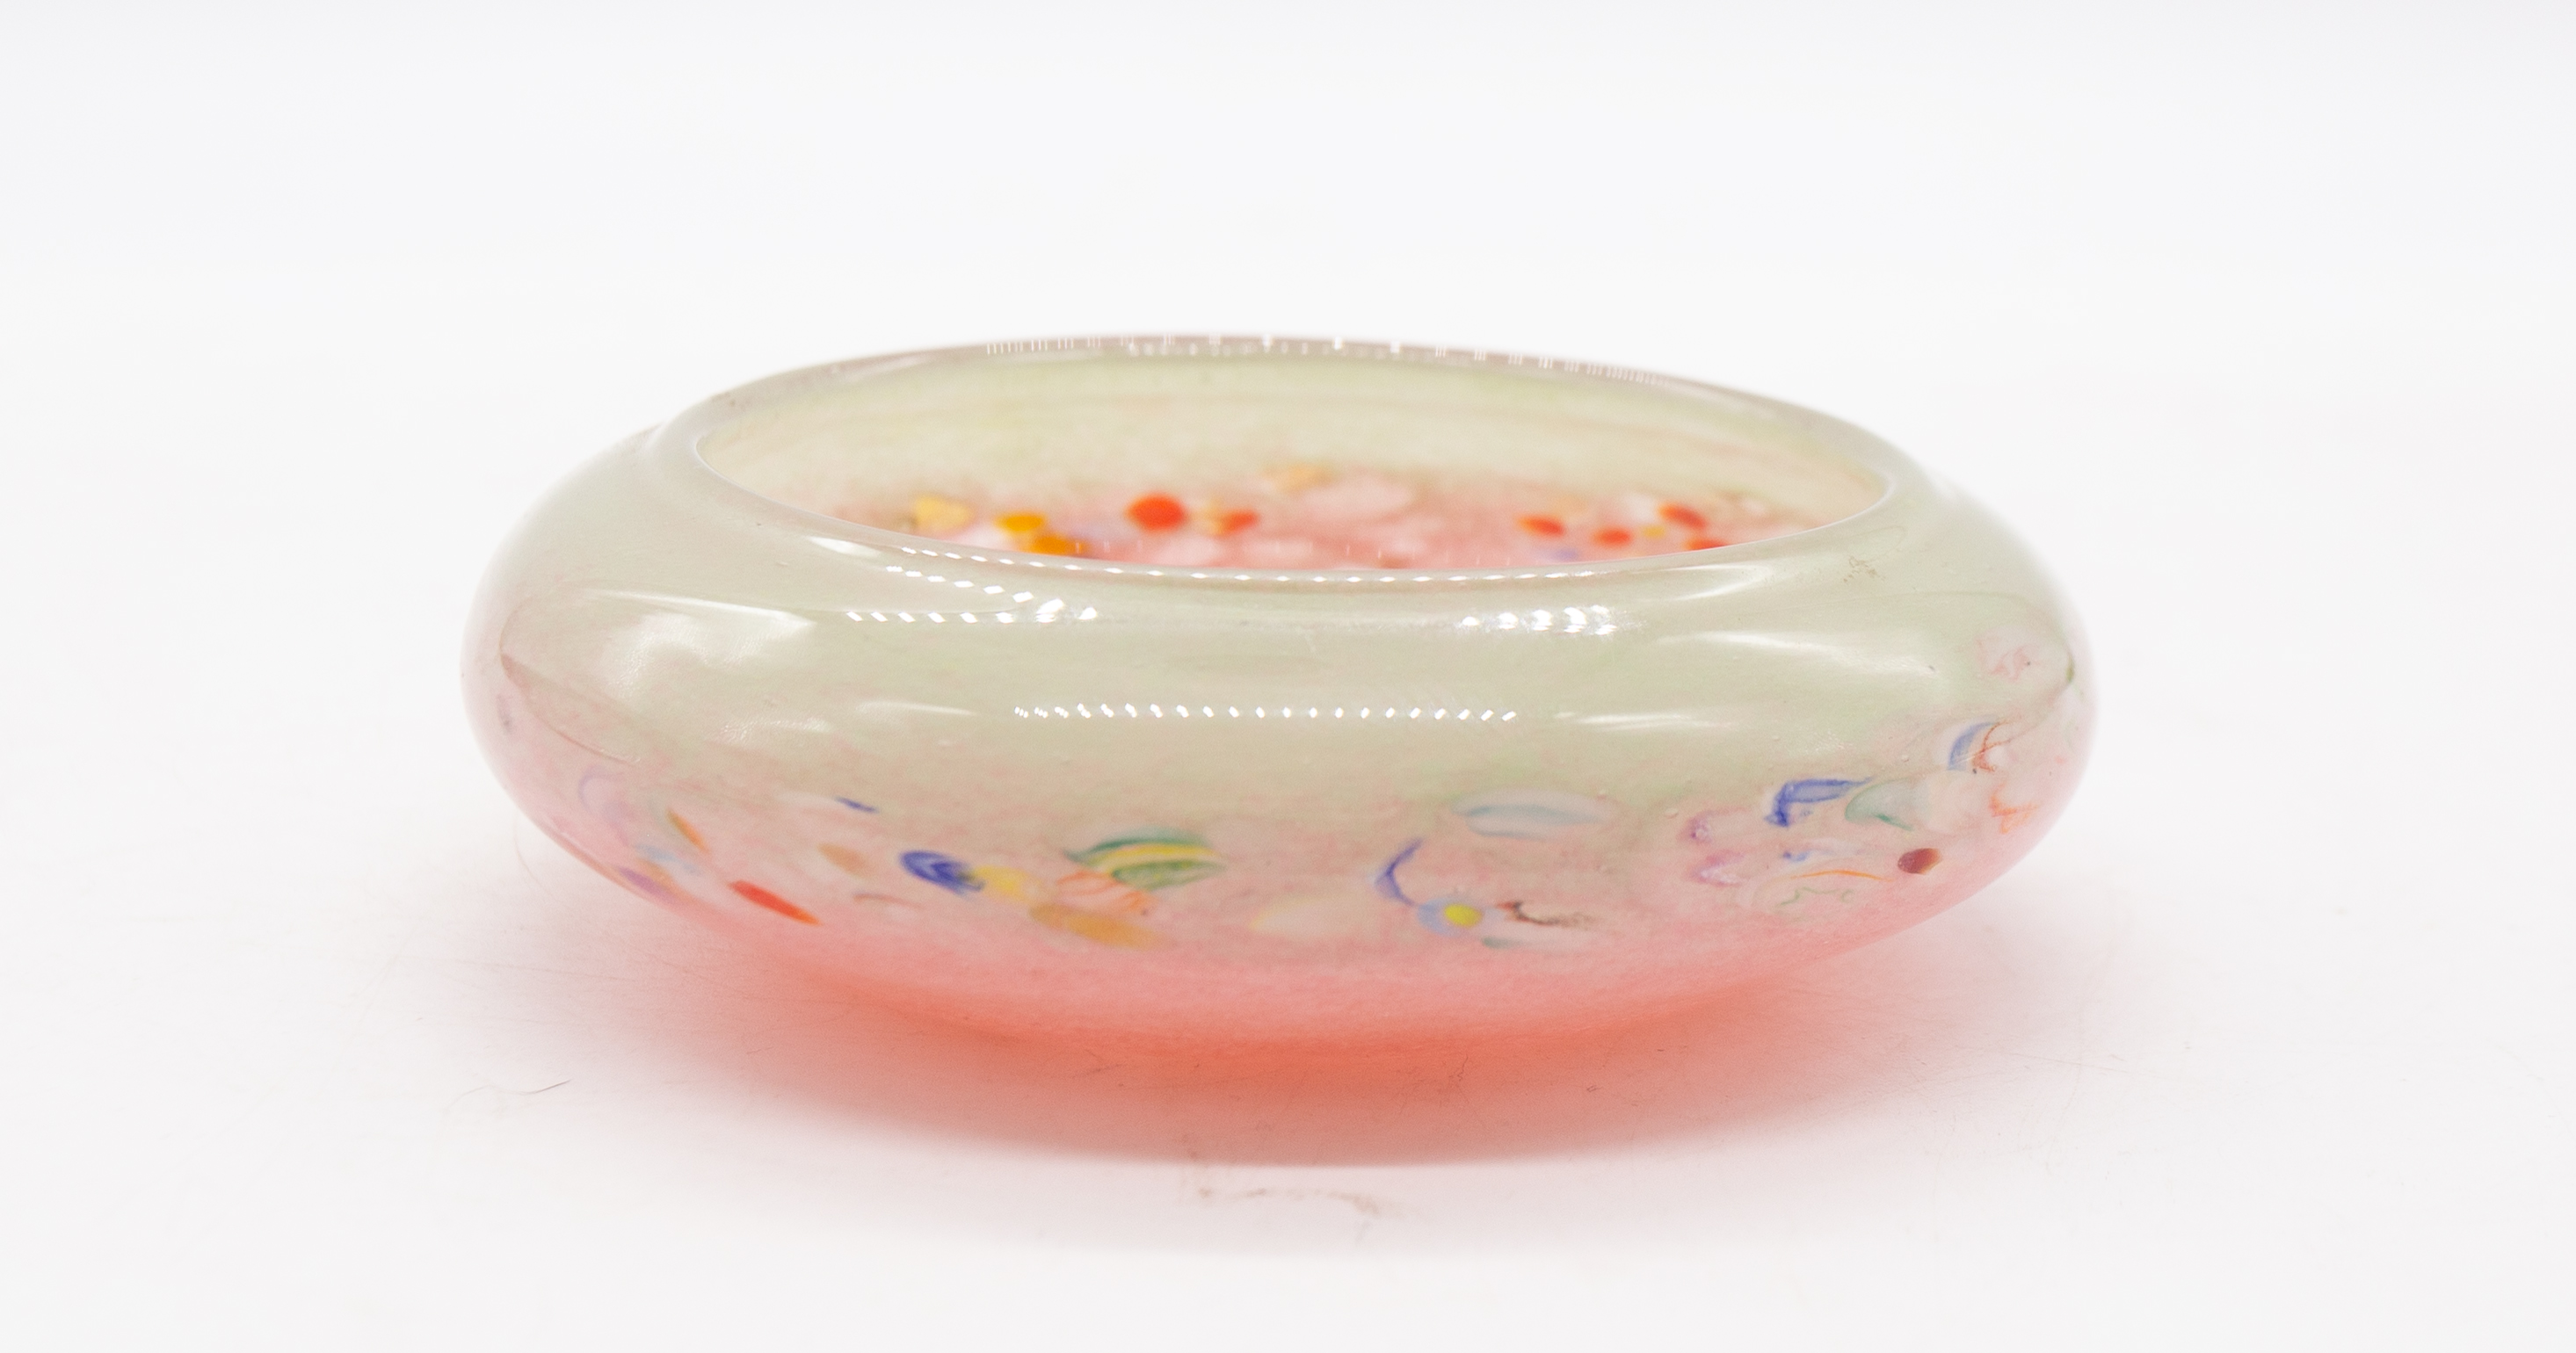 A Monart 20th century small glass circular bowl, having various coloured speckles throughout green